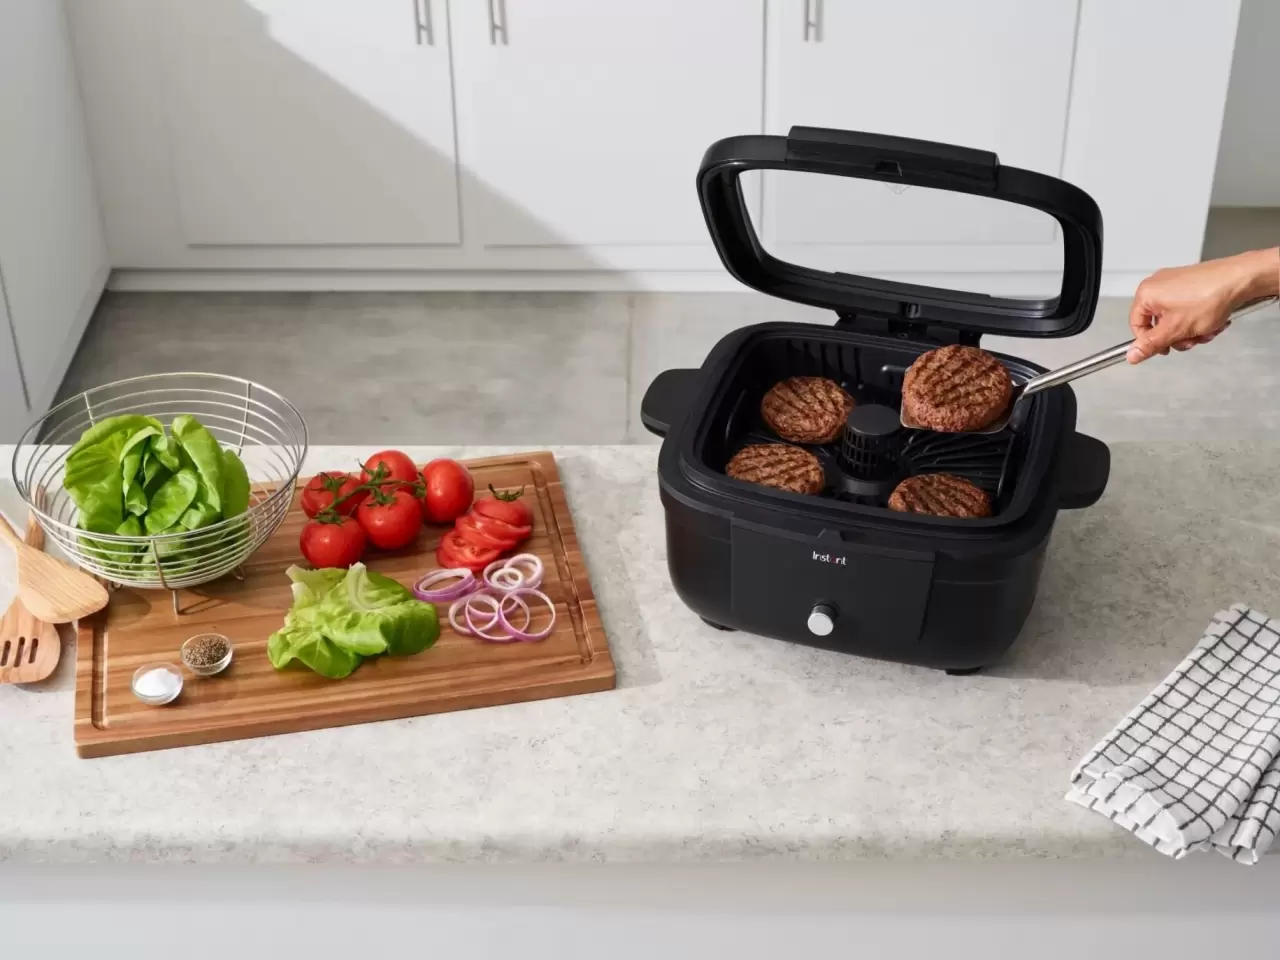 Instant Brands launches multifunctional indoor grill & air fryer img#1